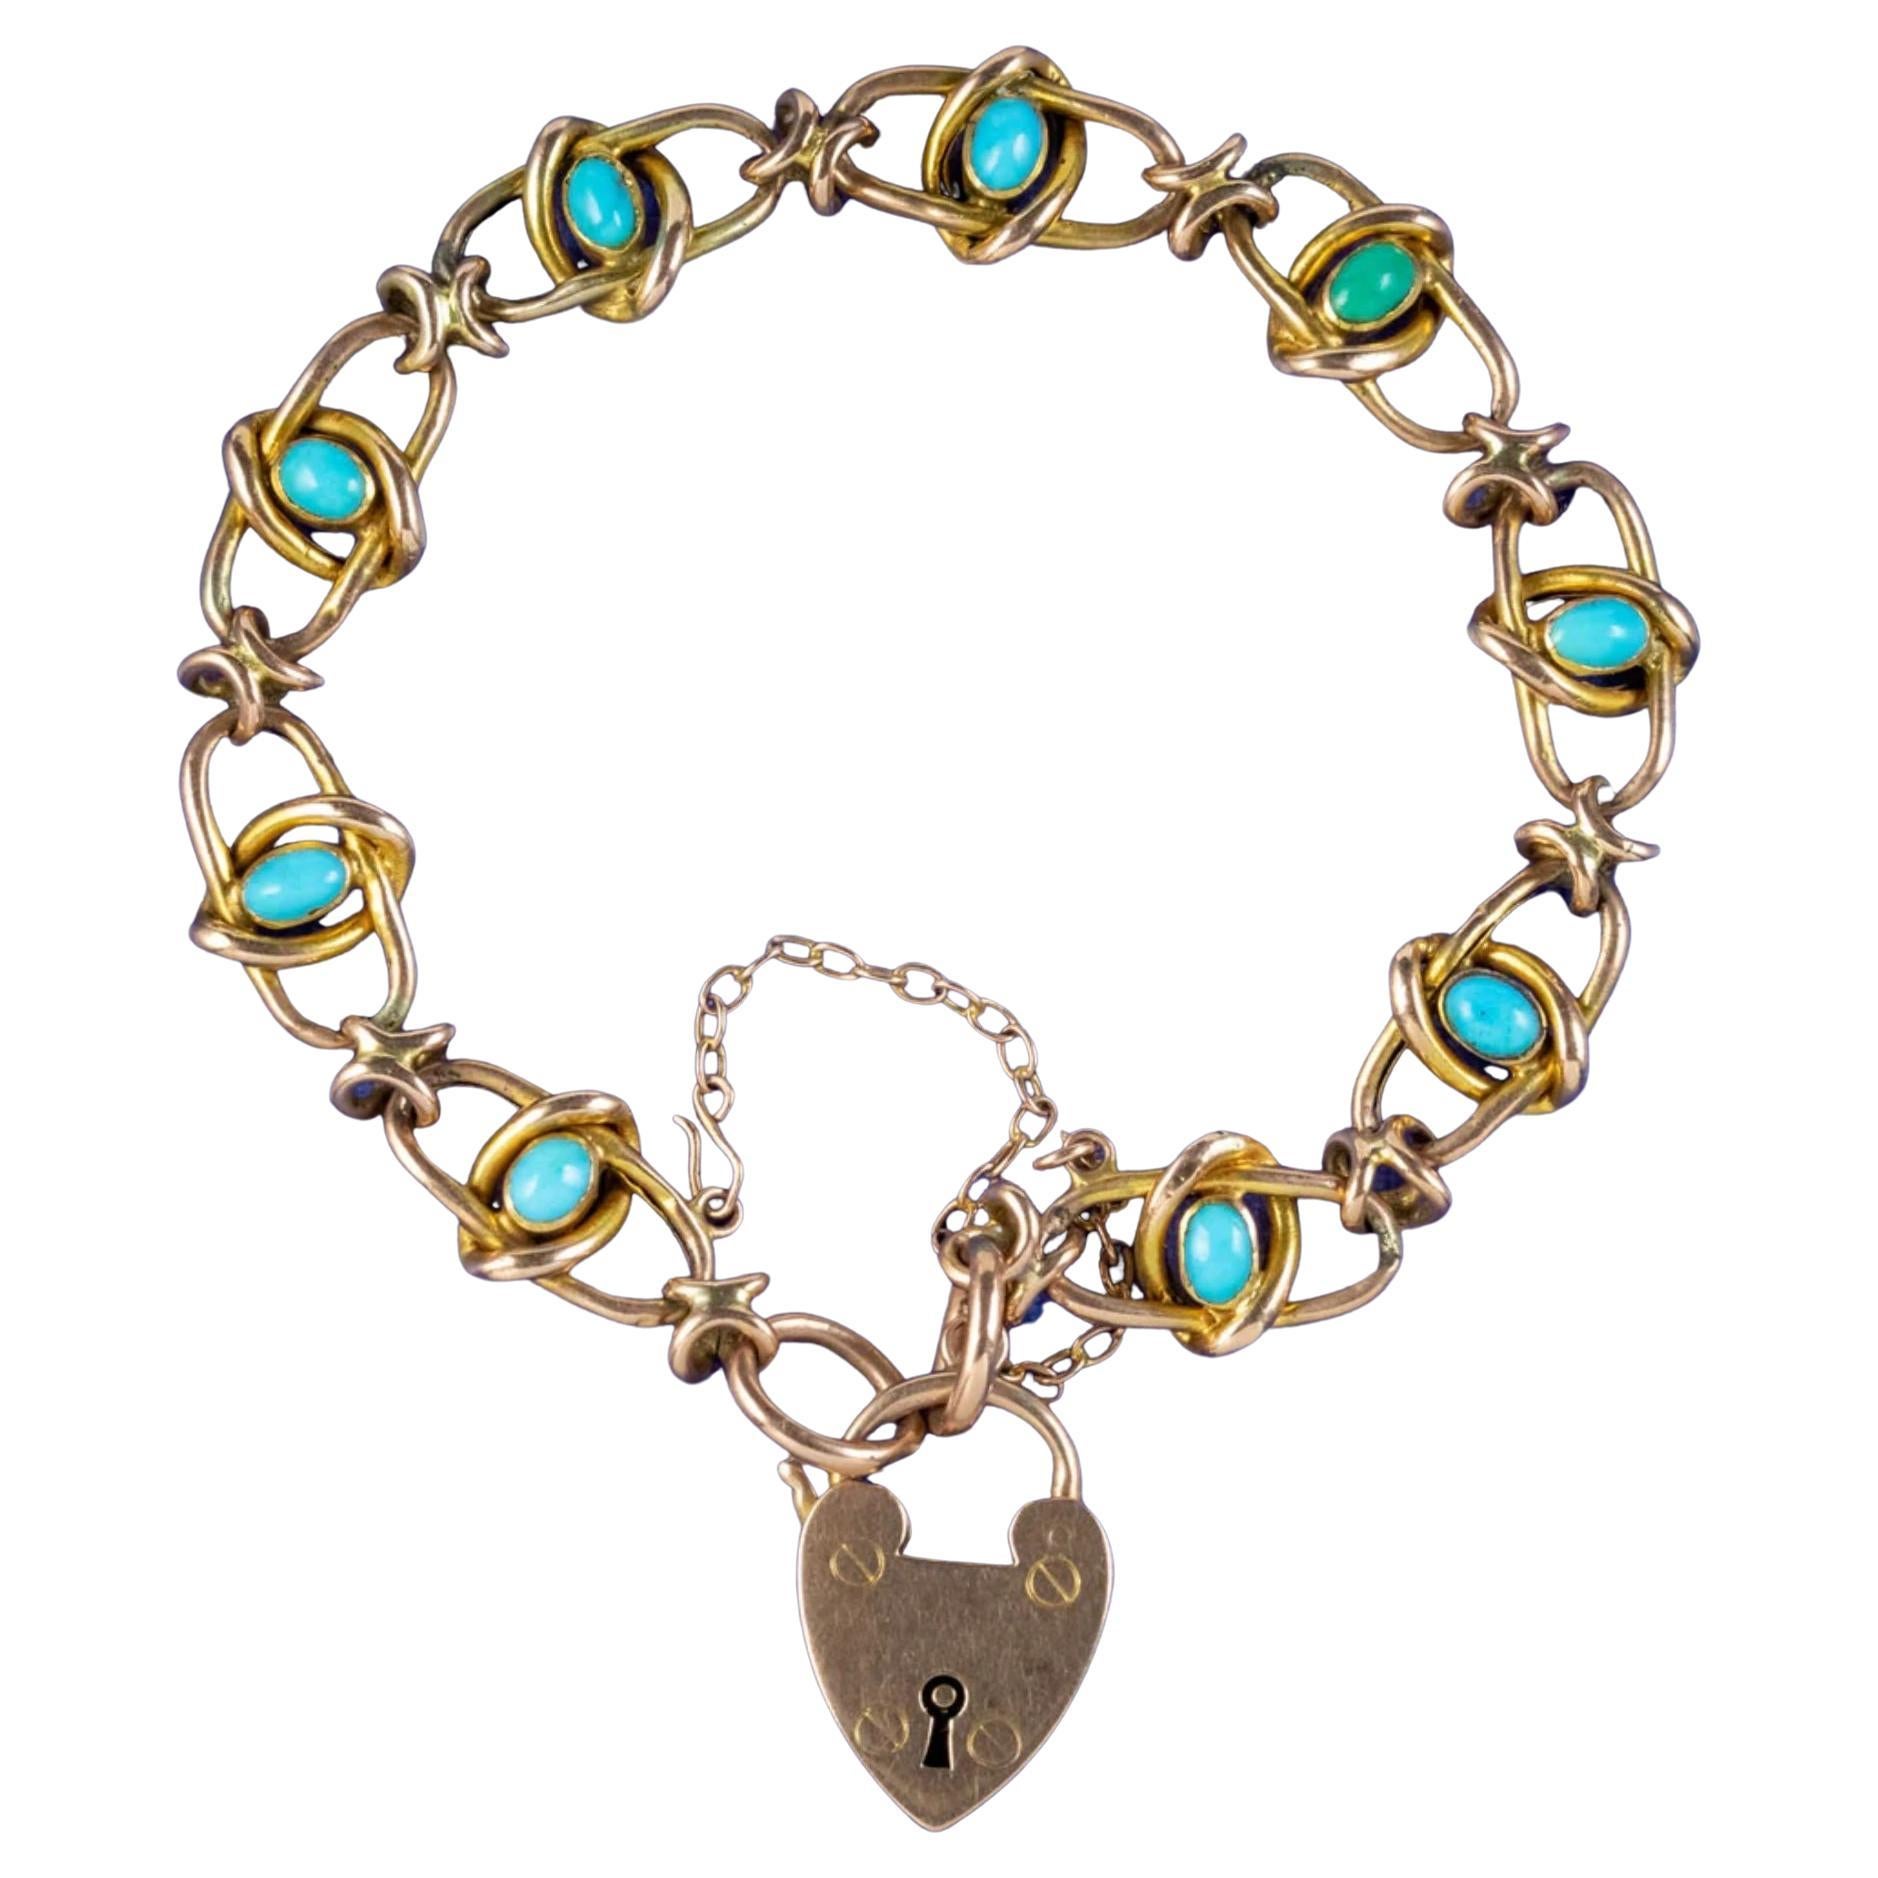 Antique Victorian Turquoise Bracelet in 9ct Gold with Heart Padlock, circa 1890